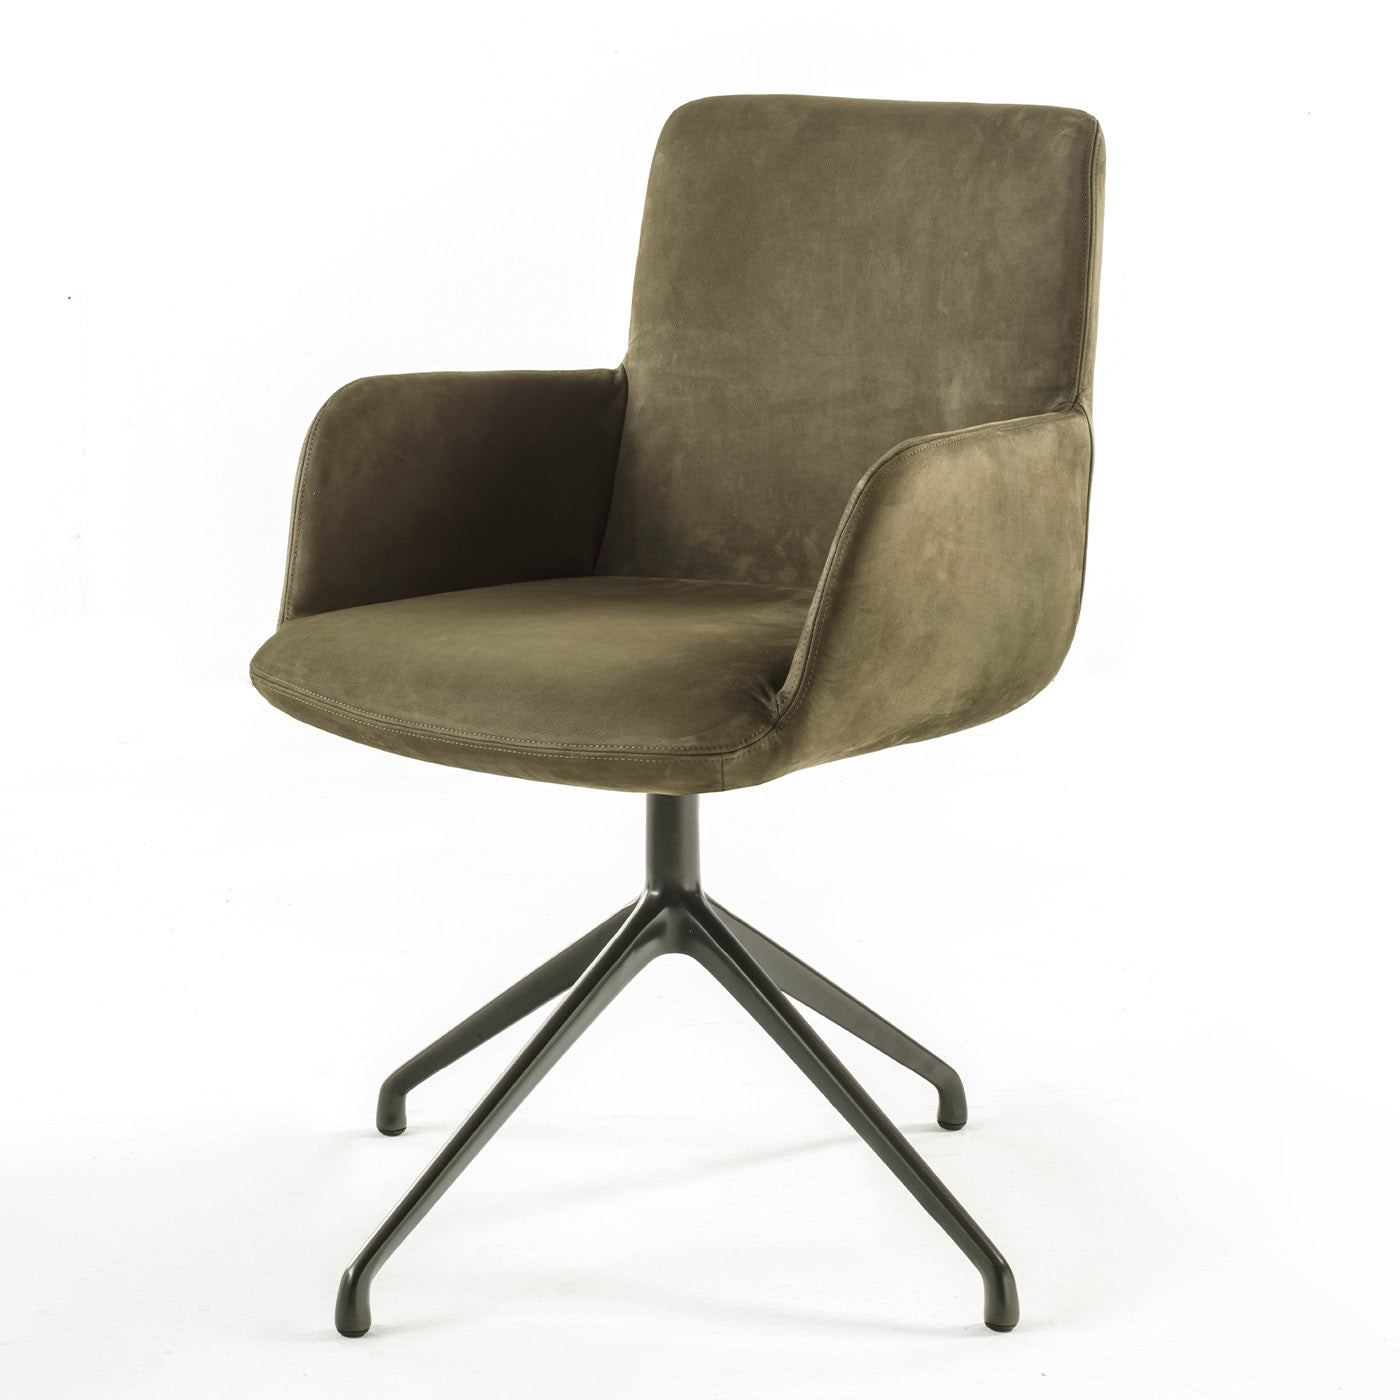 Materia Soft Swivel Sage-Green Chair With Armrests by Claudio Bellini - Alternative view 4